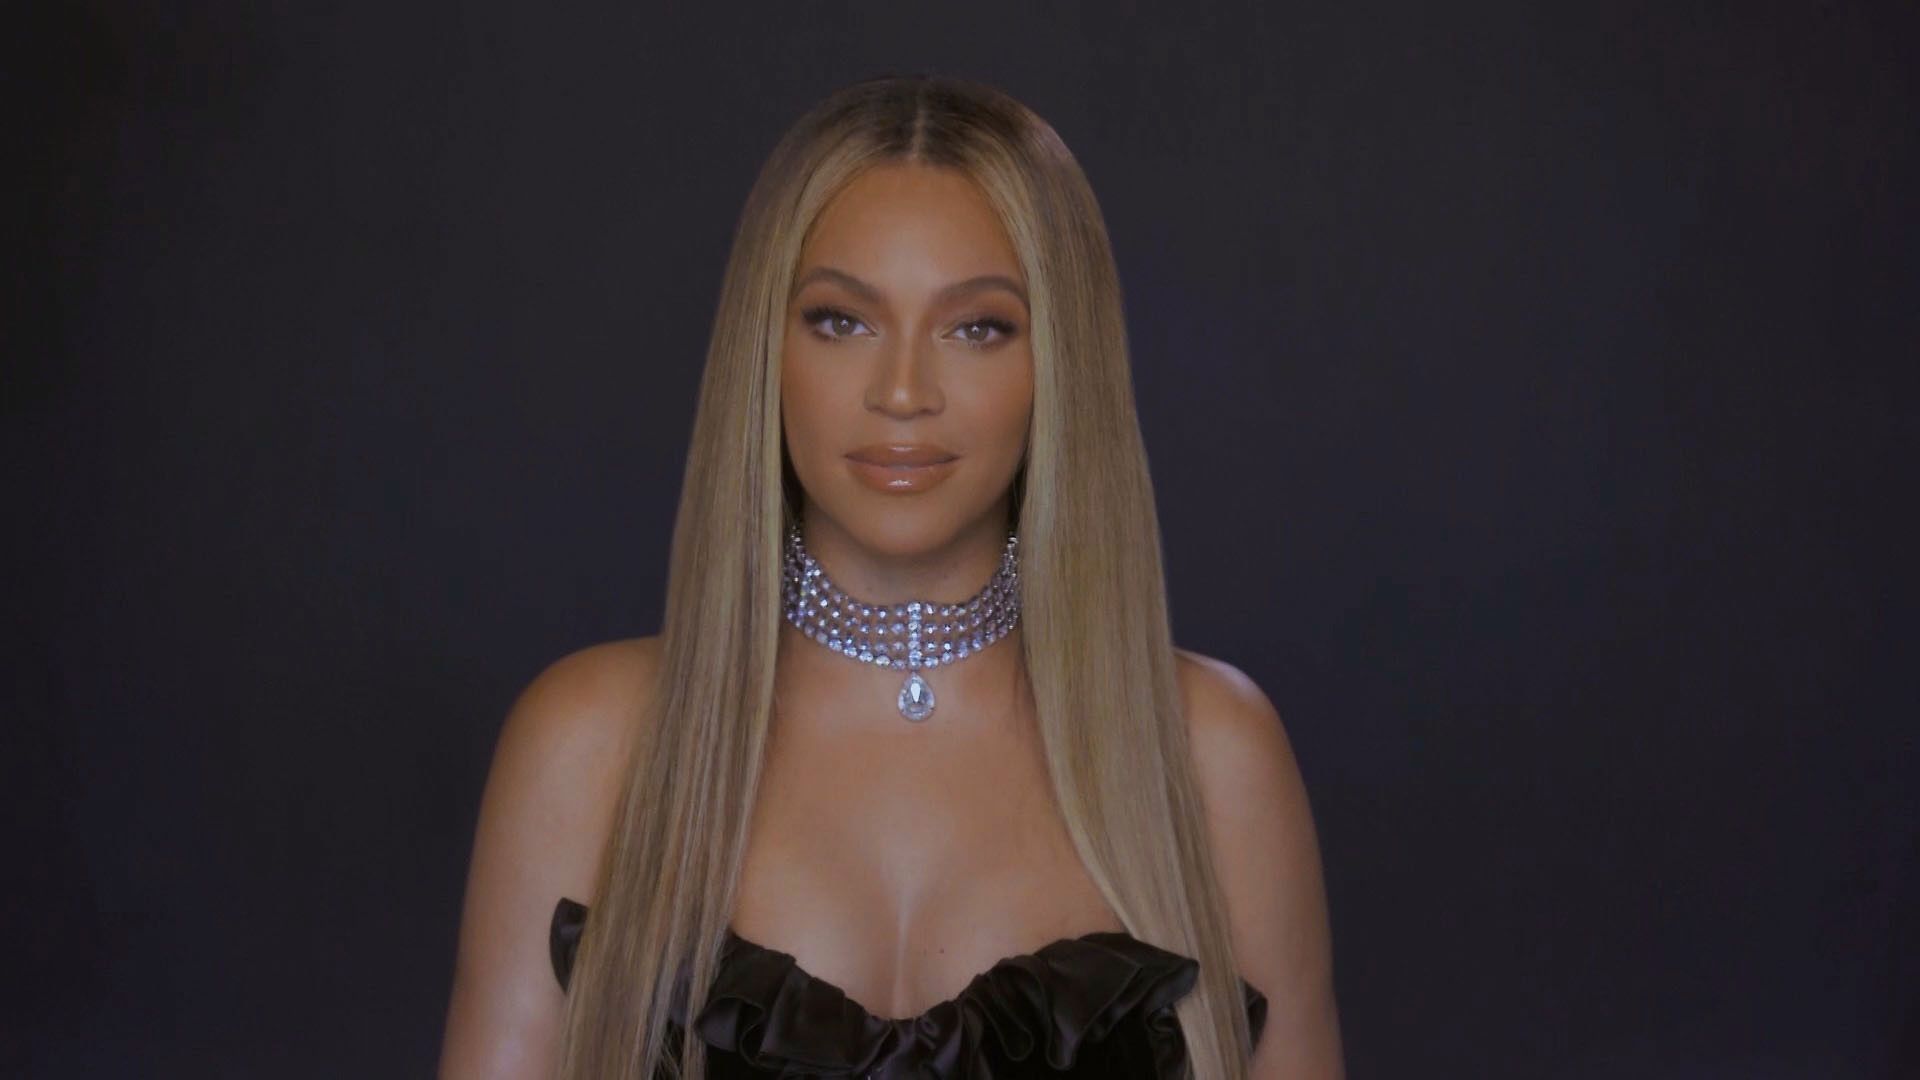 Beyoncé Once Got a Tattoo She Instantly Regretted, Despite Its Sweet Meaning